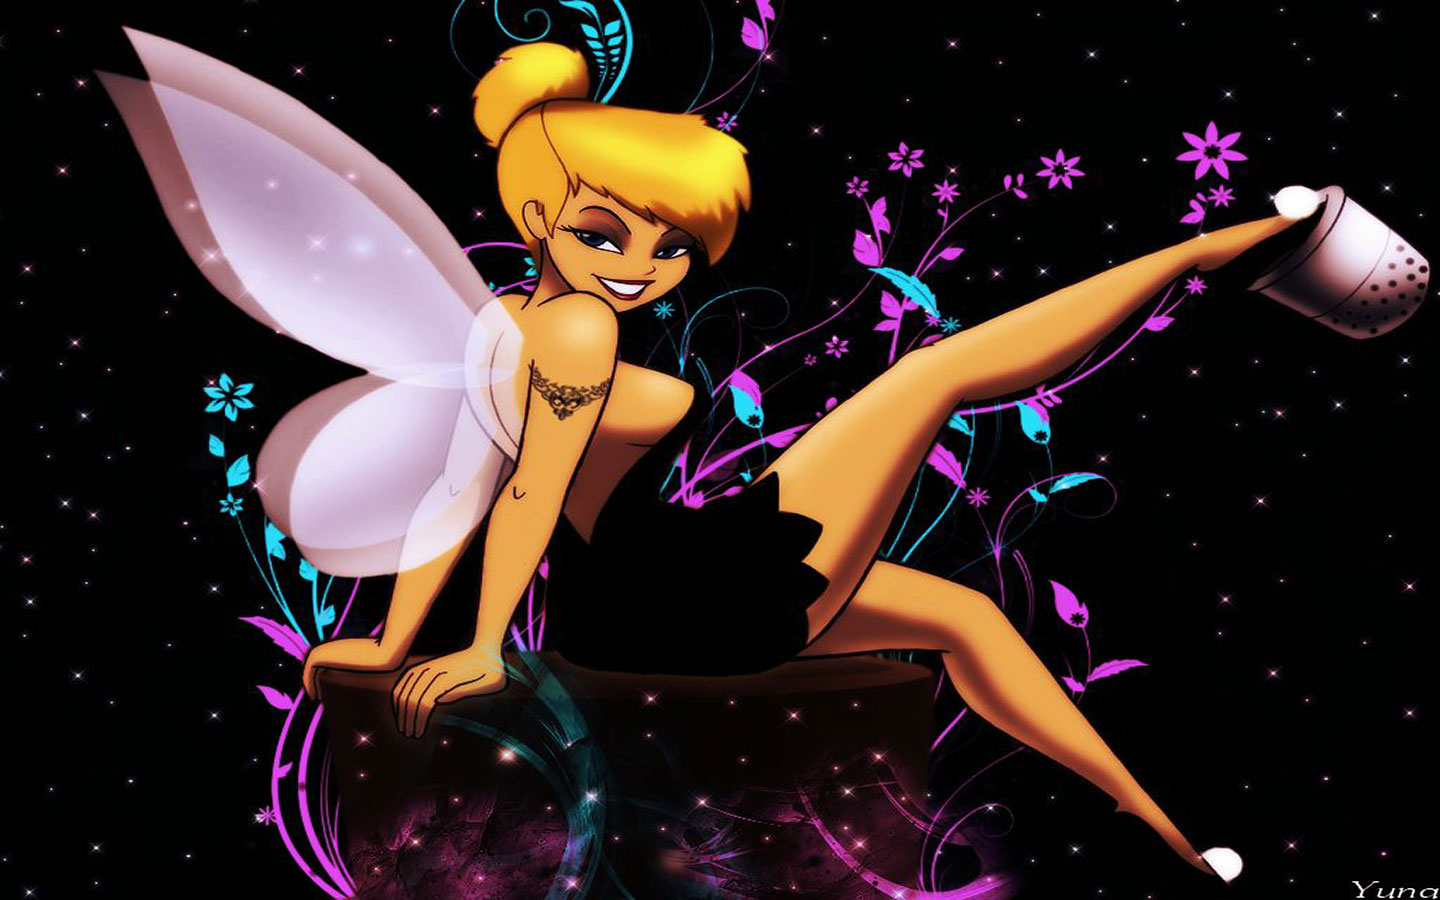 Tinker Bell Picture